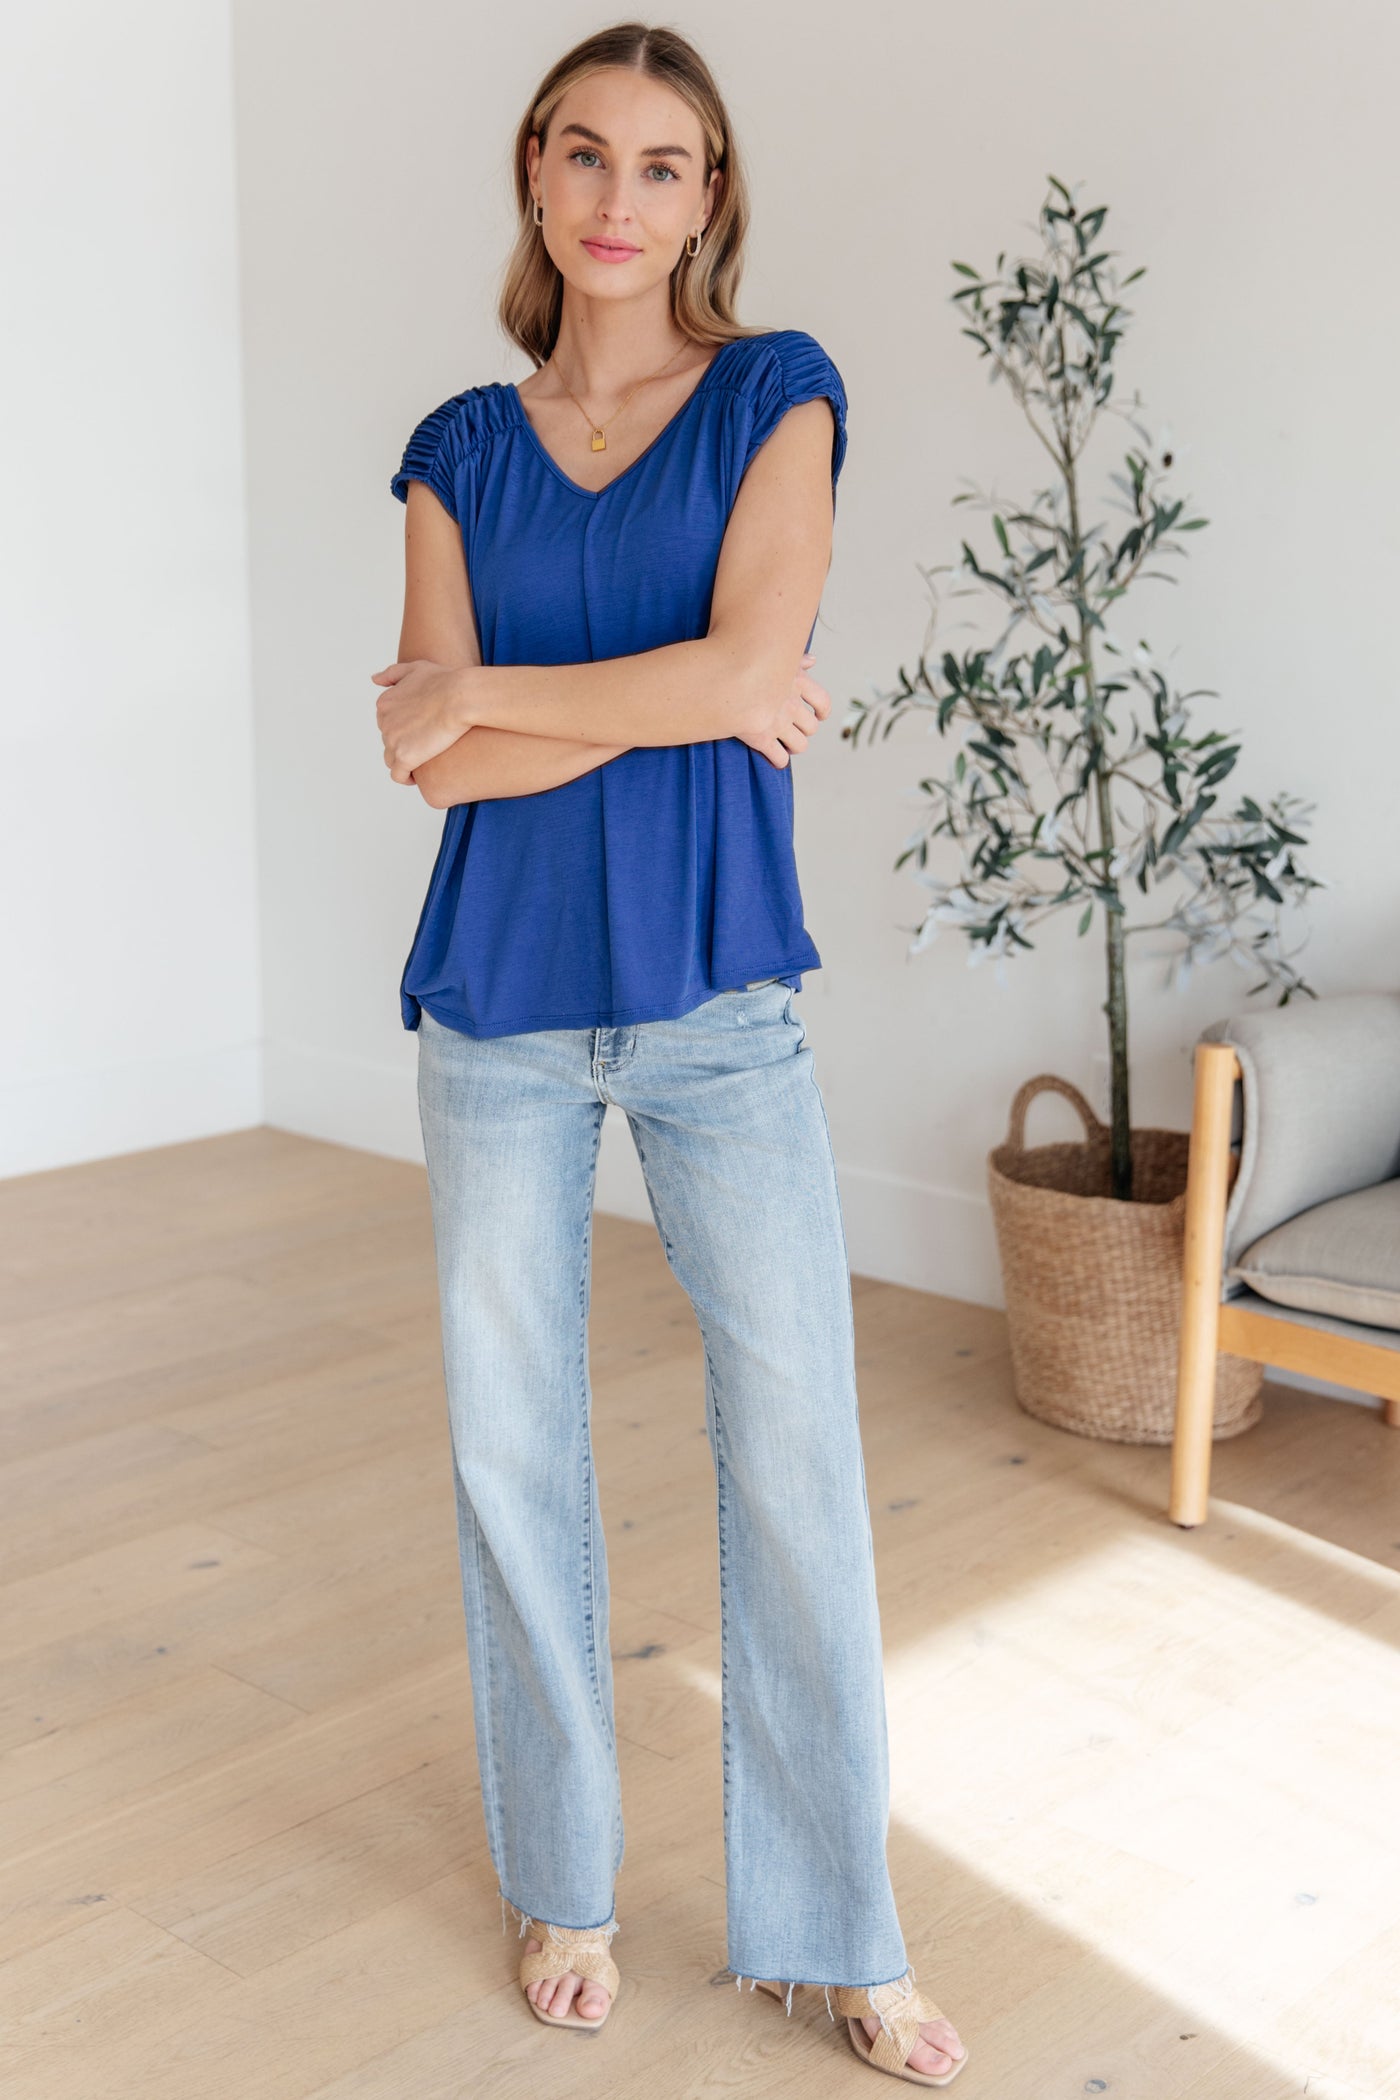 Ruched Cap Sleeve Top in Royal Blue-Womens-Ave Shops-Market Street Nest, Fashionable Clothing, Shoes and Home Décor Located in Mabank, TX